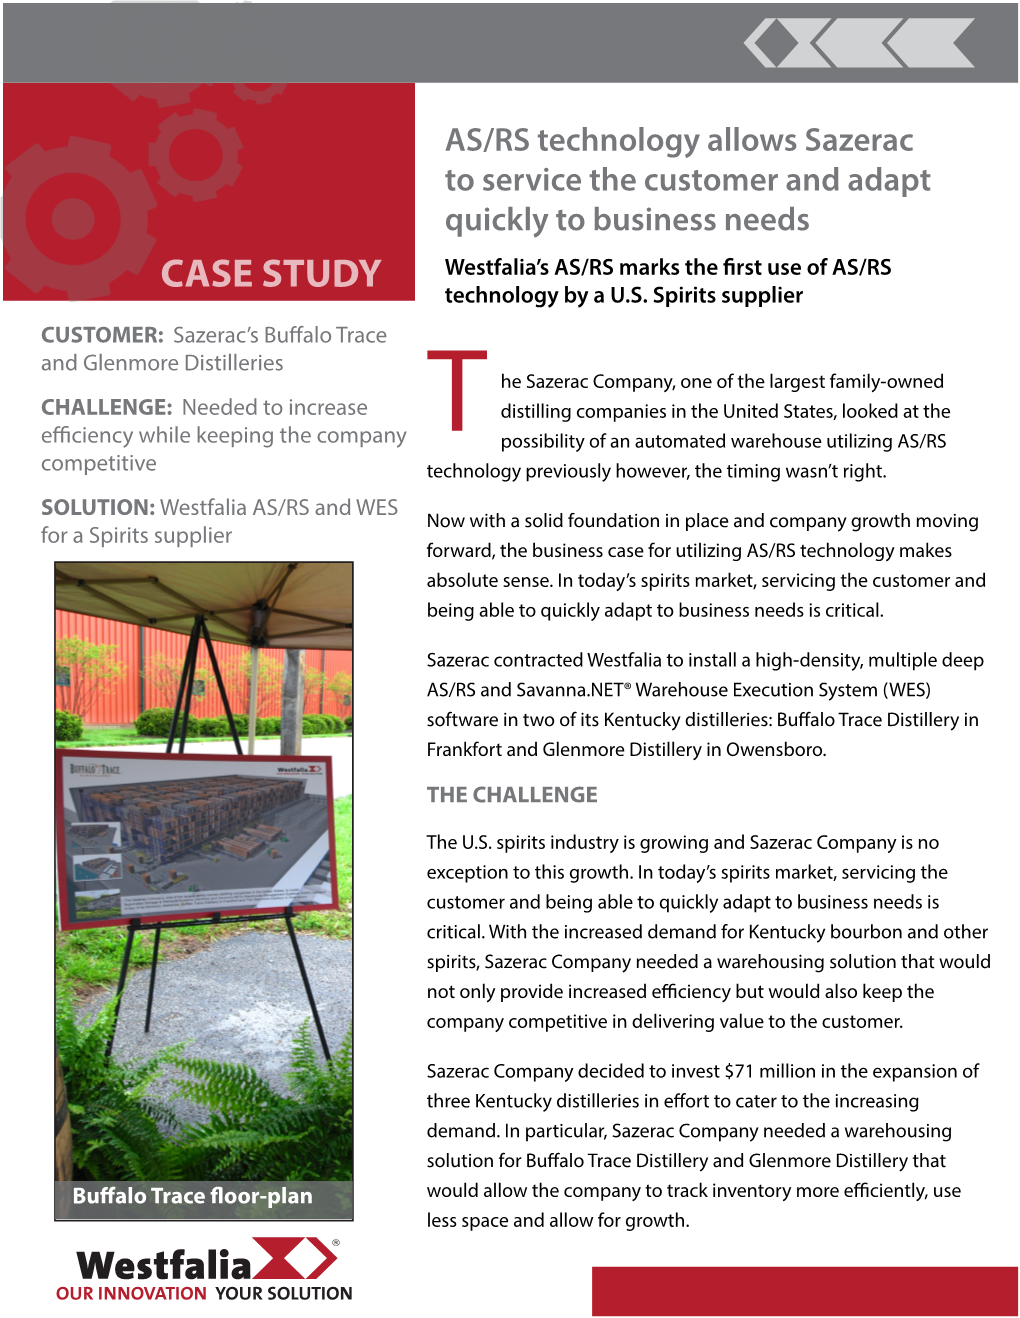 CASE STUDY Westfalia’S AS/RS Marks the First Use of AS/RS Technology by a U.S